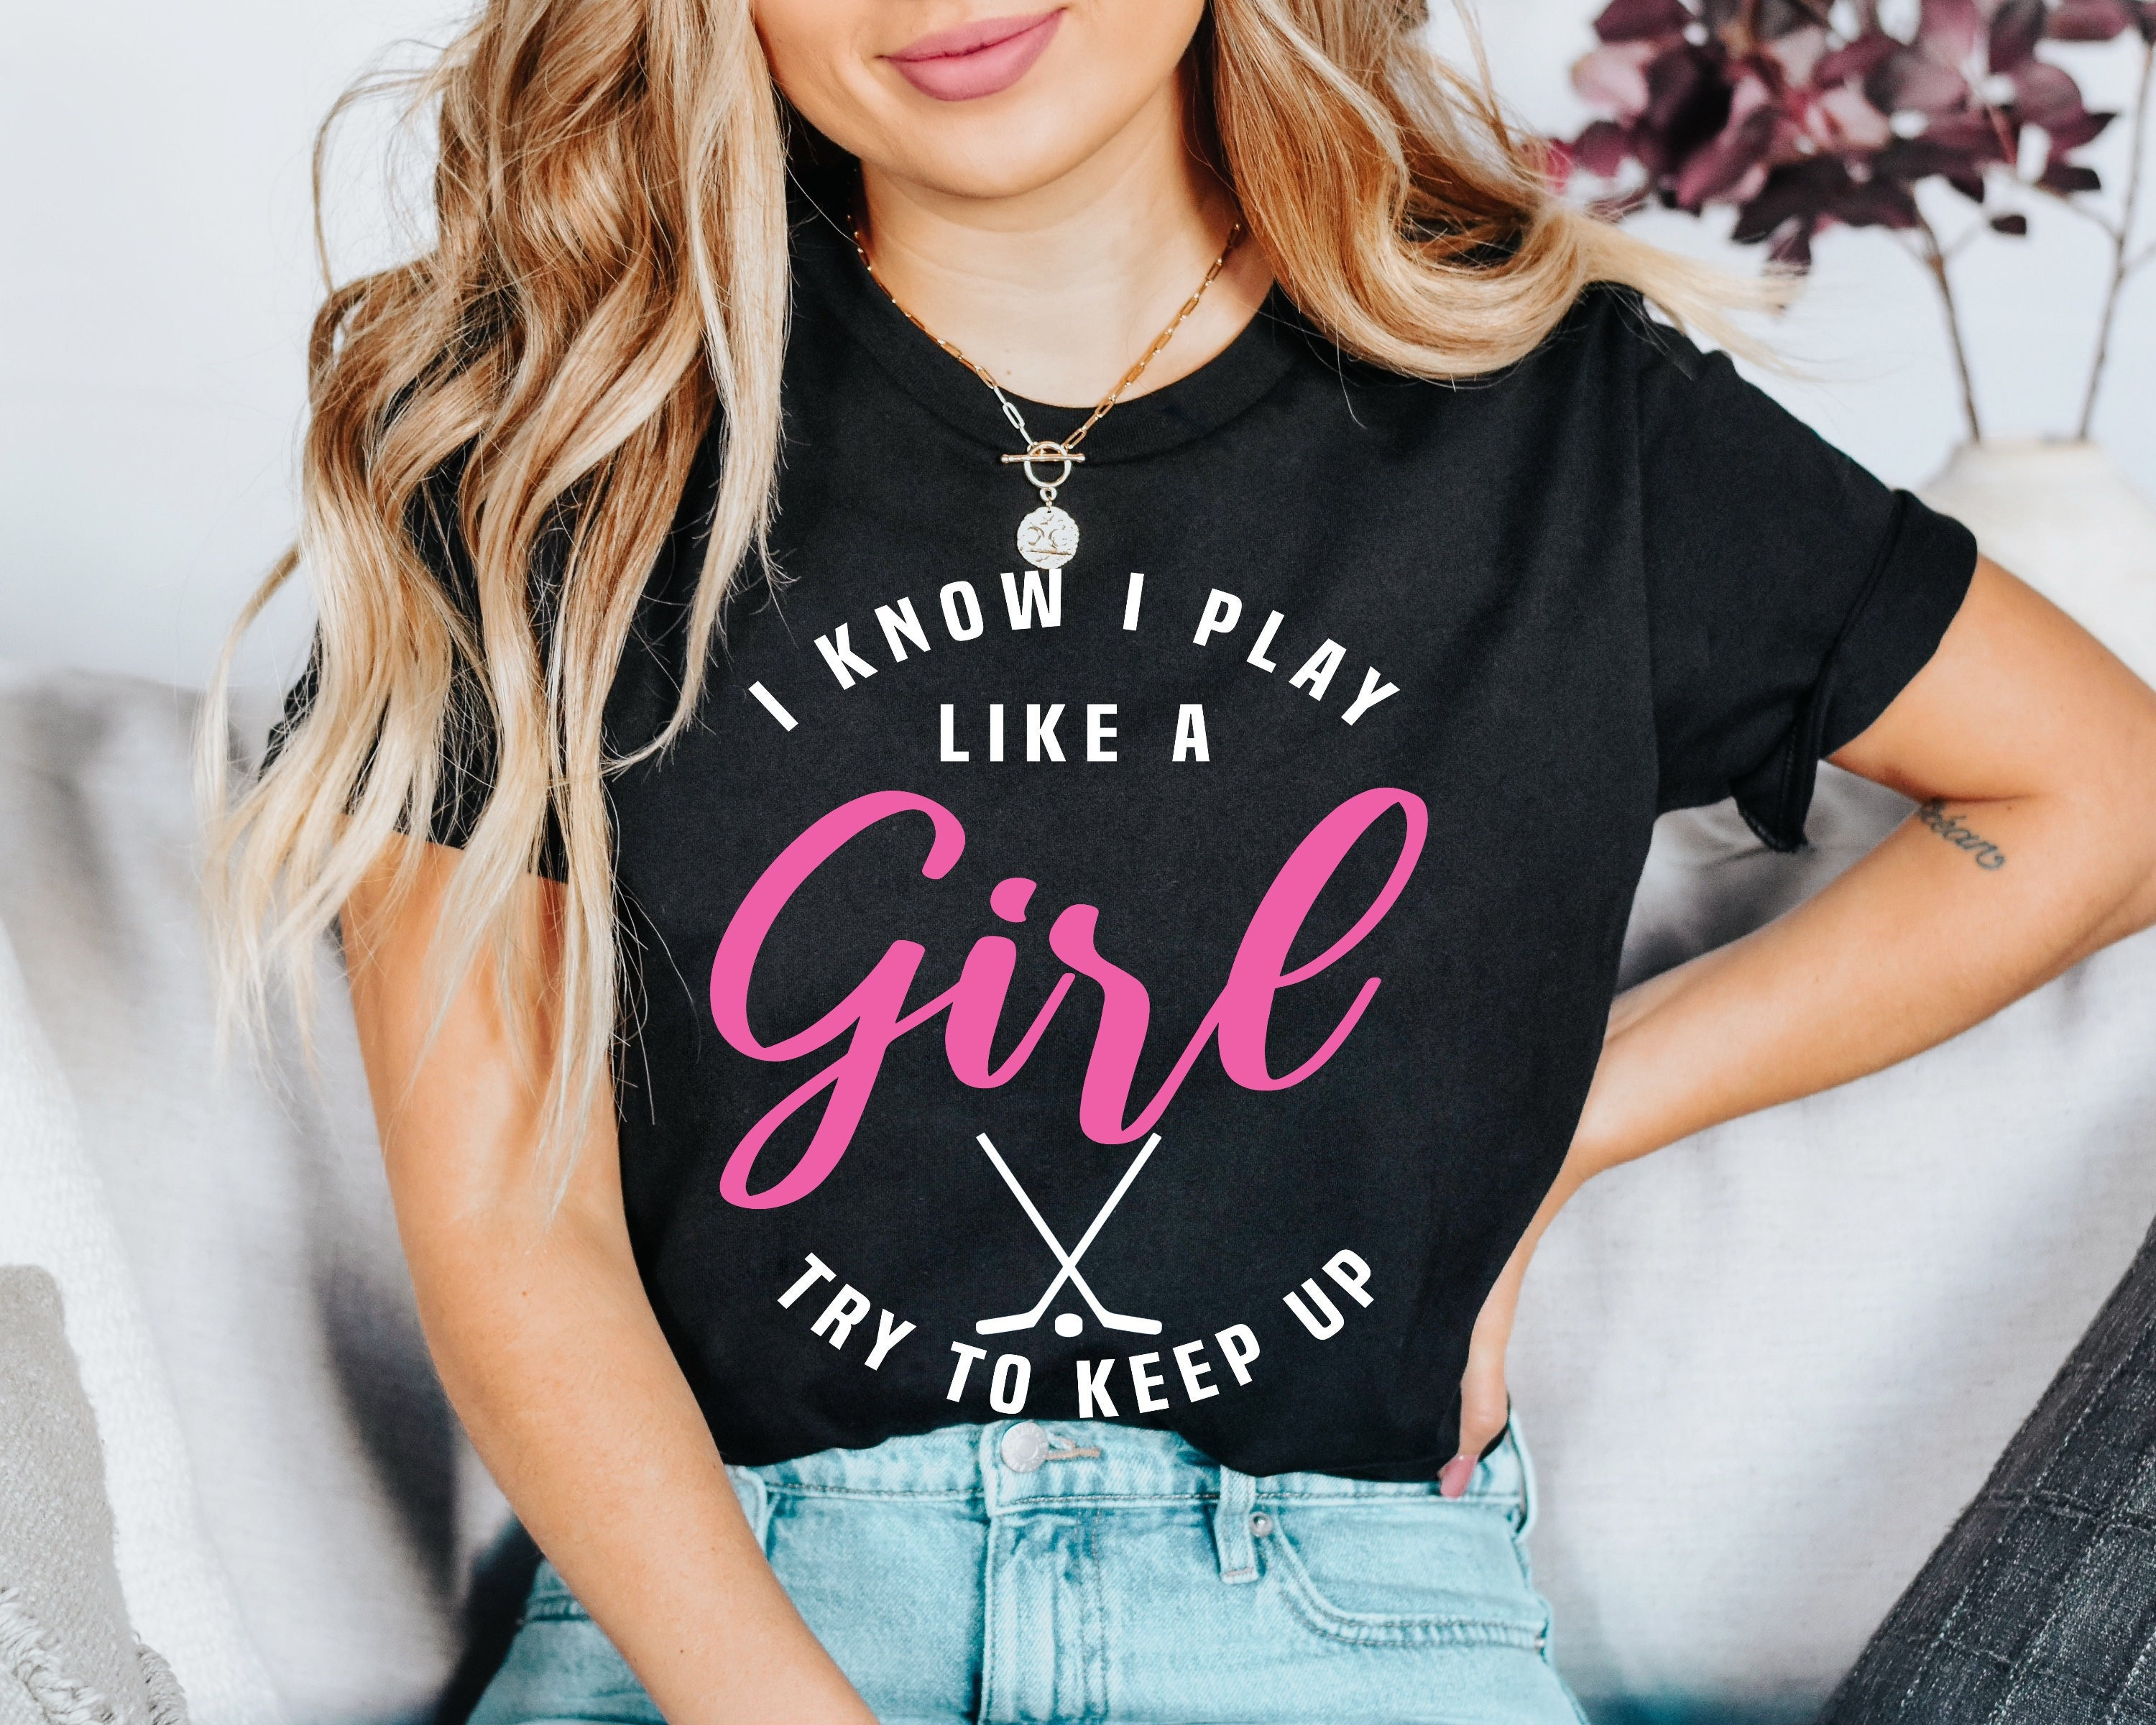 Funny, Unique Hockey Shirt for Girls, Women, and Teens T-Shirt